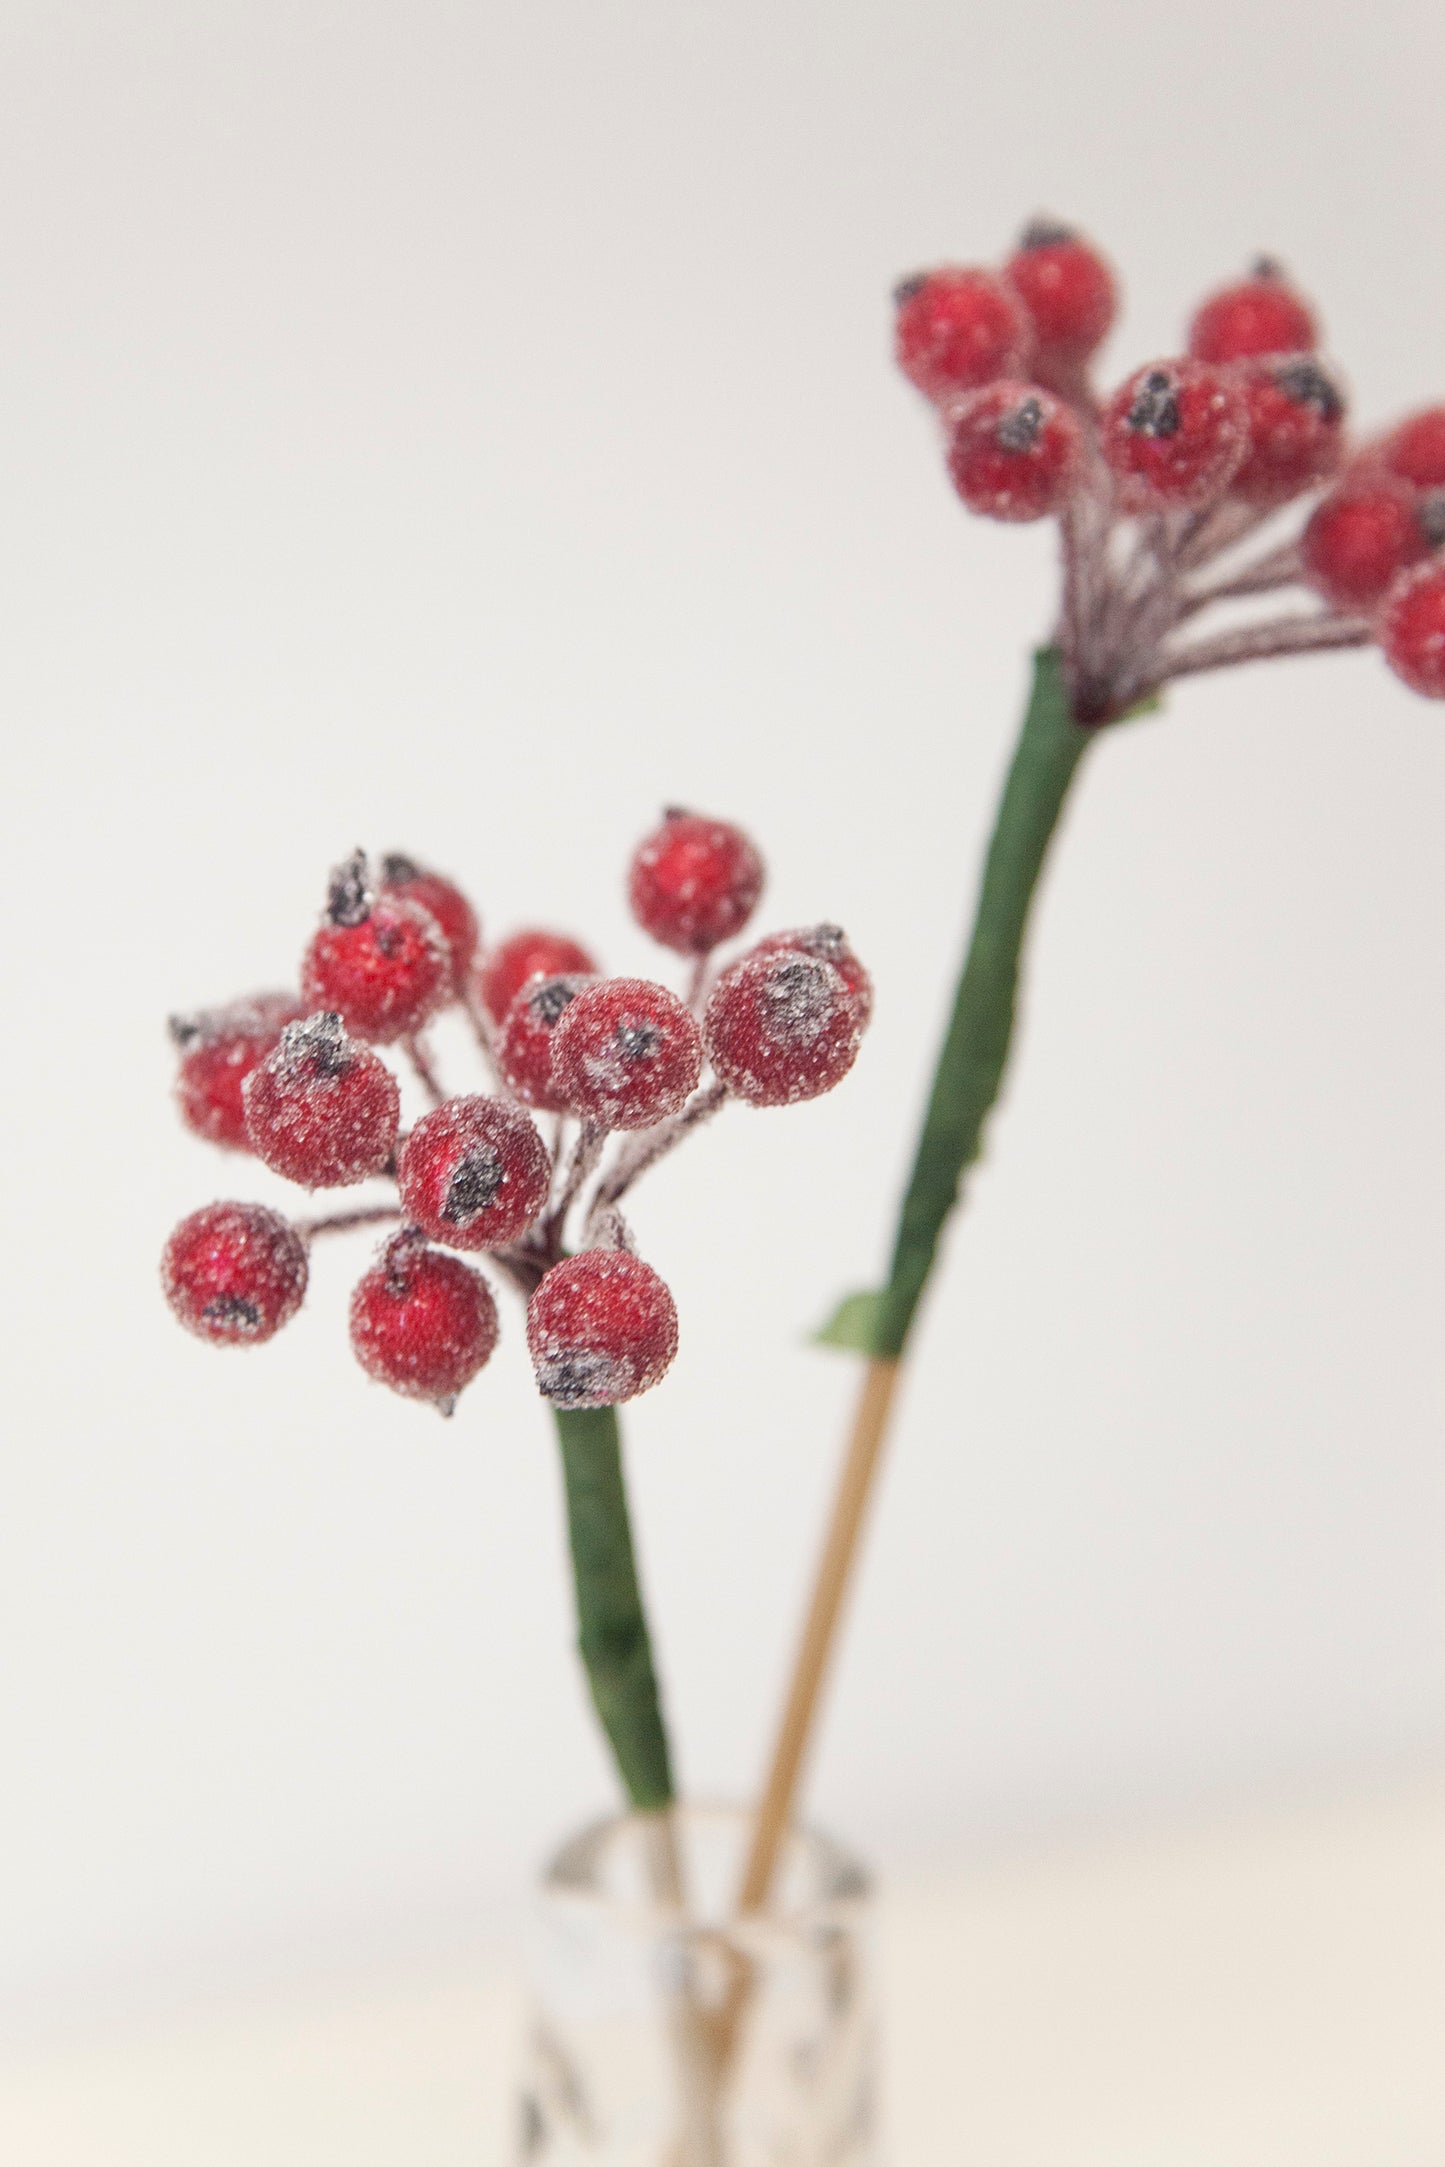 Crystalized Berries